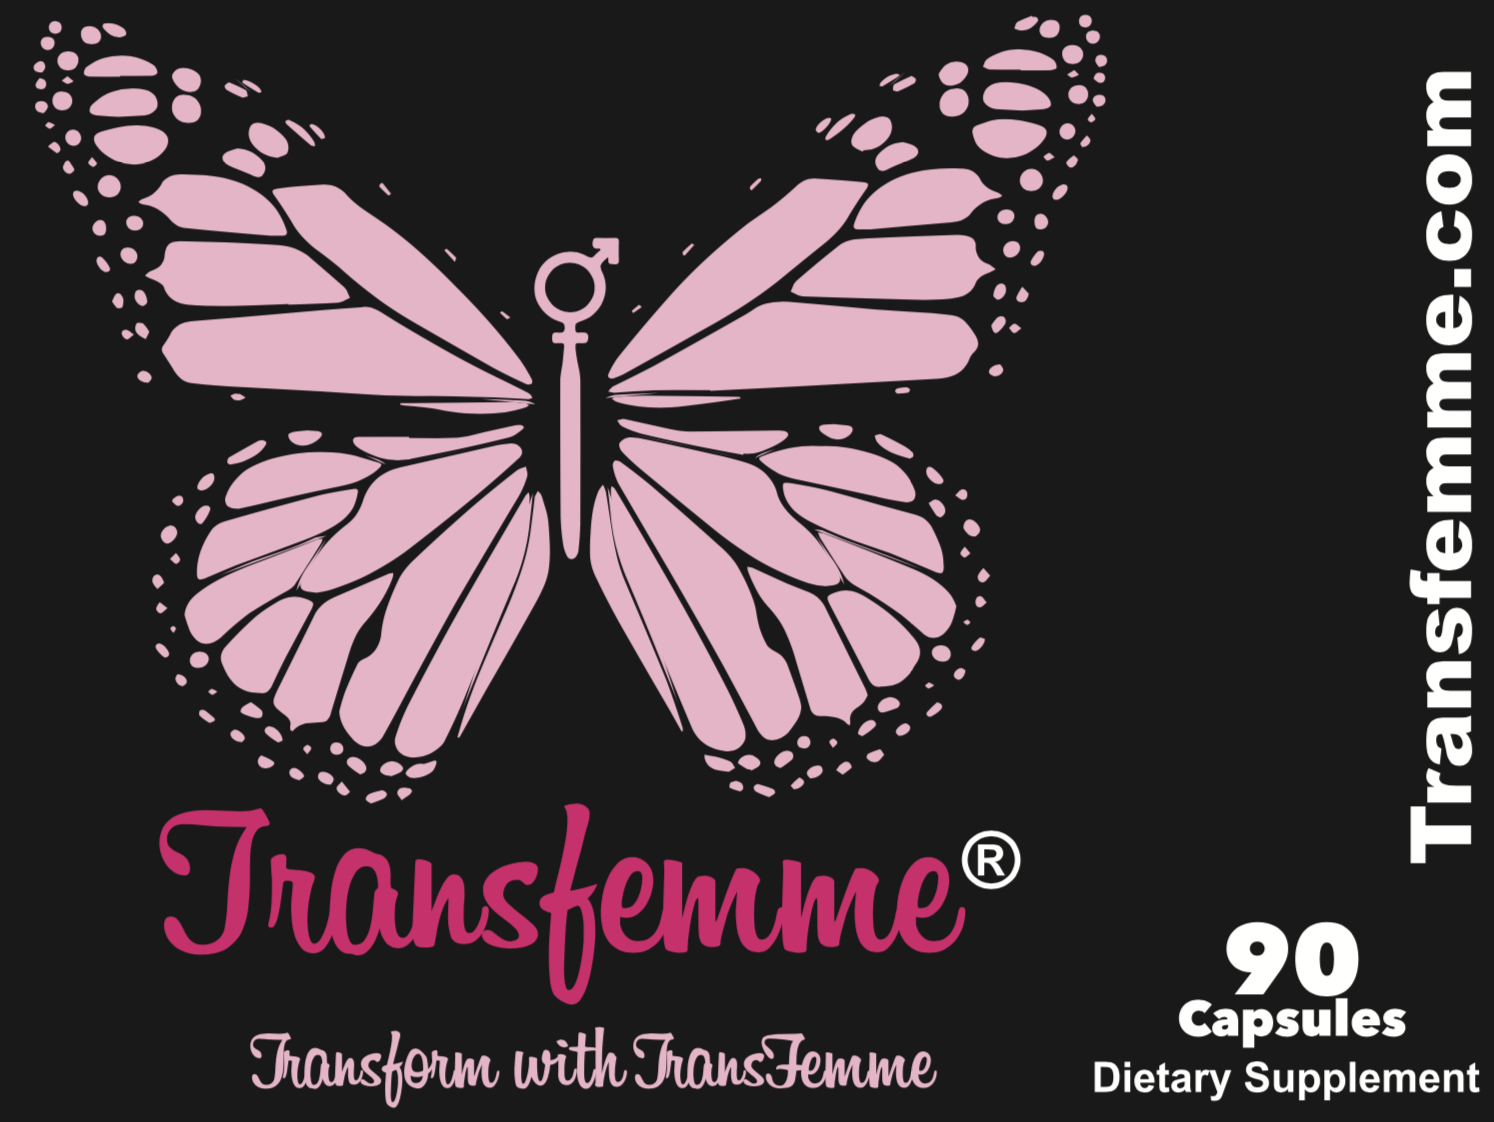 Transfemme reviews,male breast enlargement results